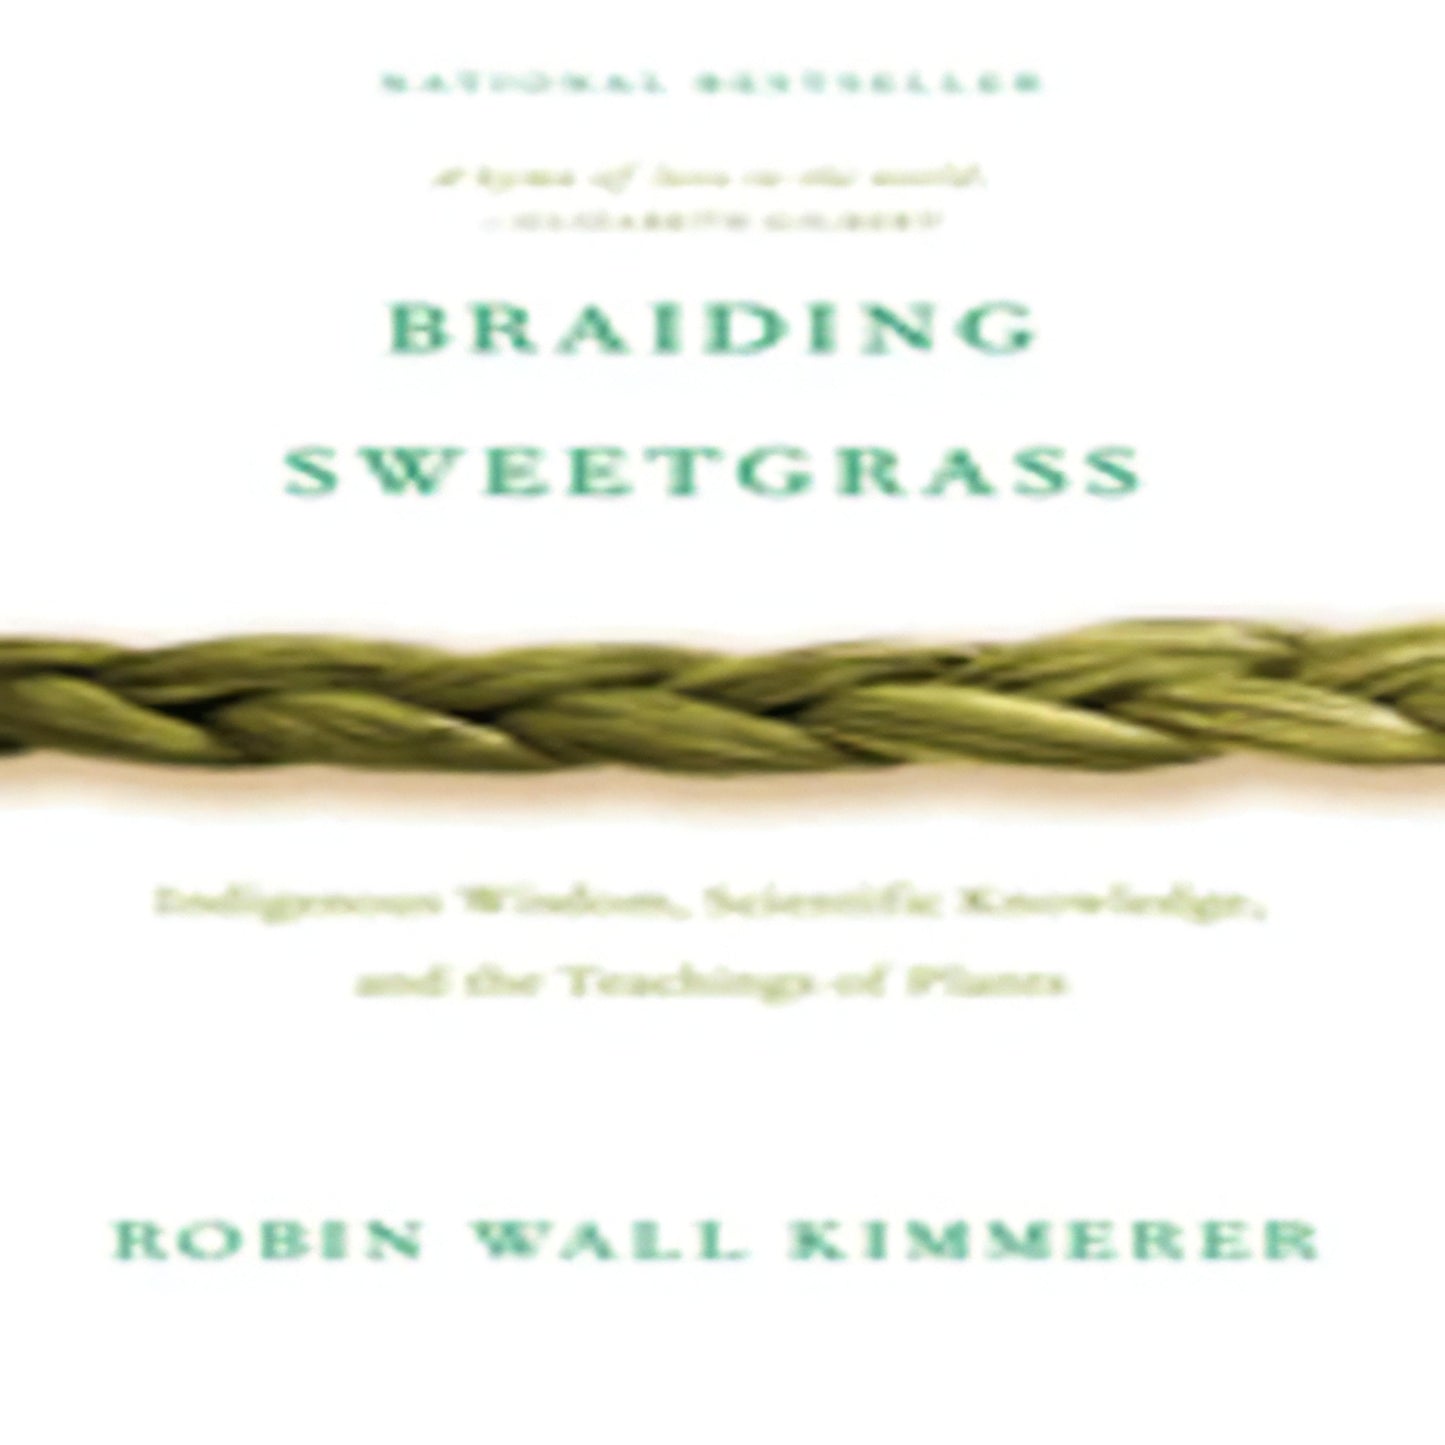 Braiding Sweetgrass214-031423-1571313567DPGBOOKSTORE.COM. Today's Bestsellers.